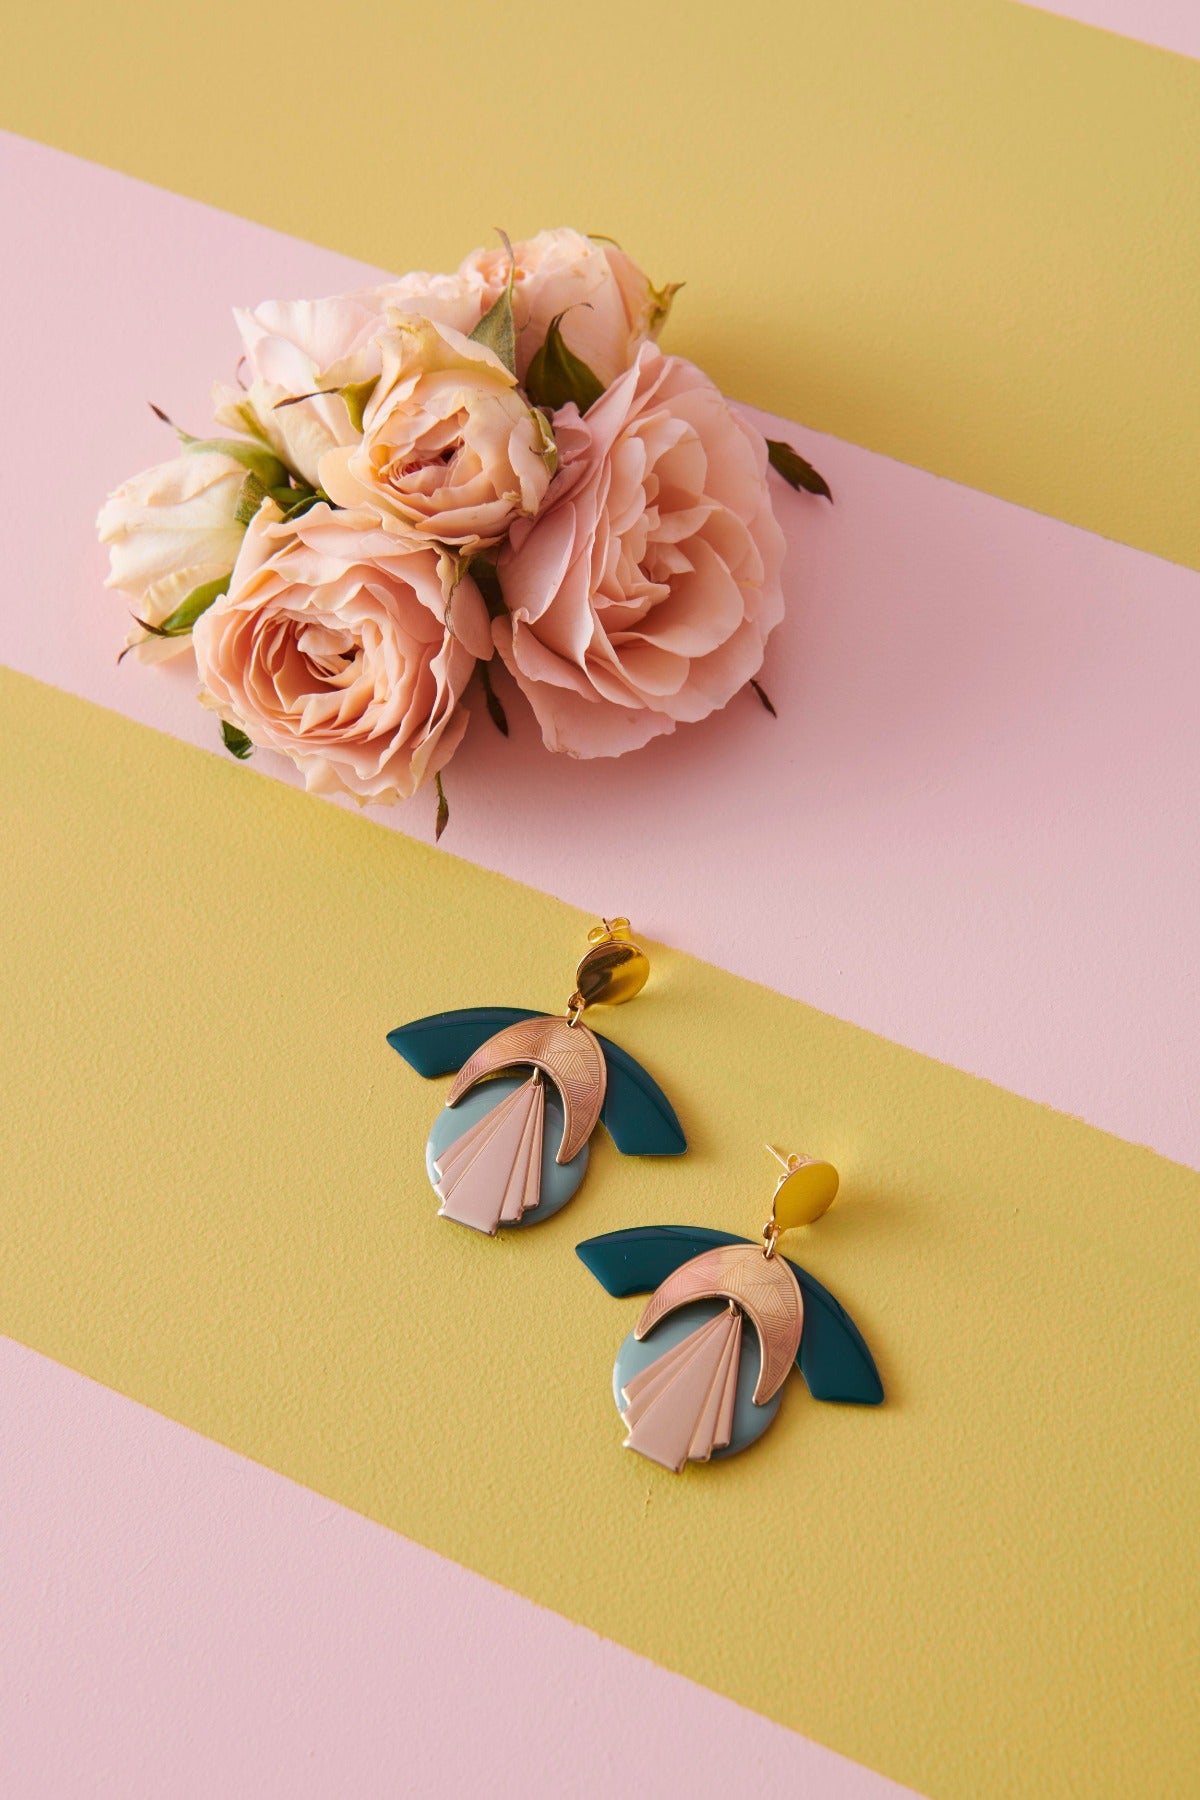 A pair of Diety earrings in the mallard and duckegg colourway lay styled against a yellow and pink striped background. A posy of pink roses lays next to them.